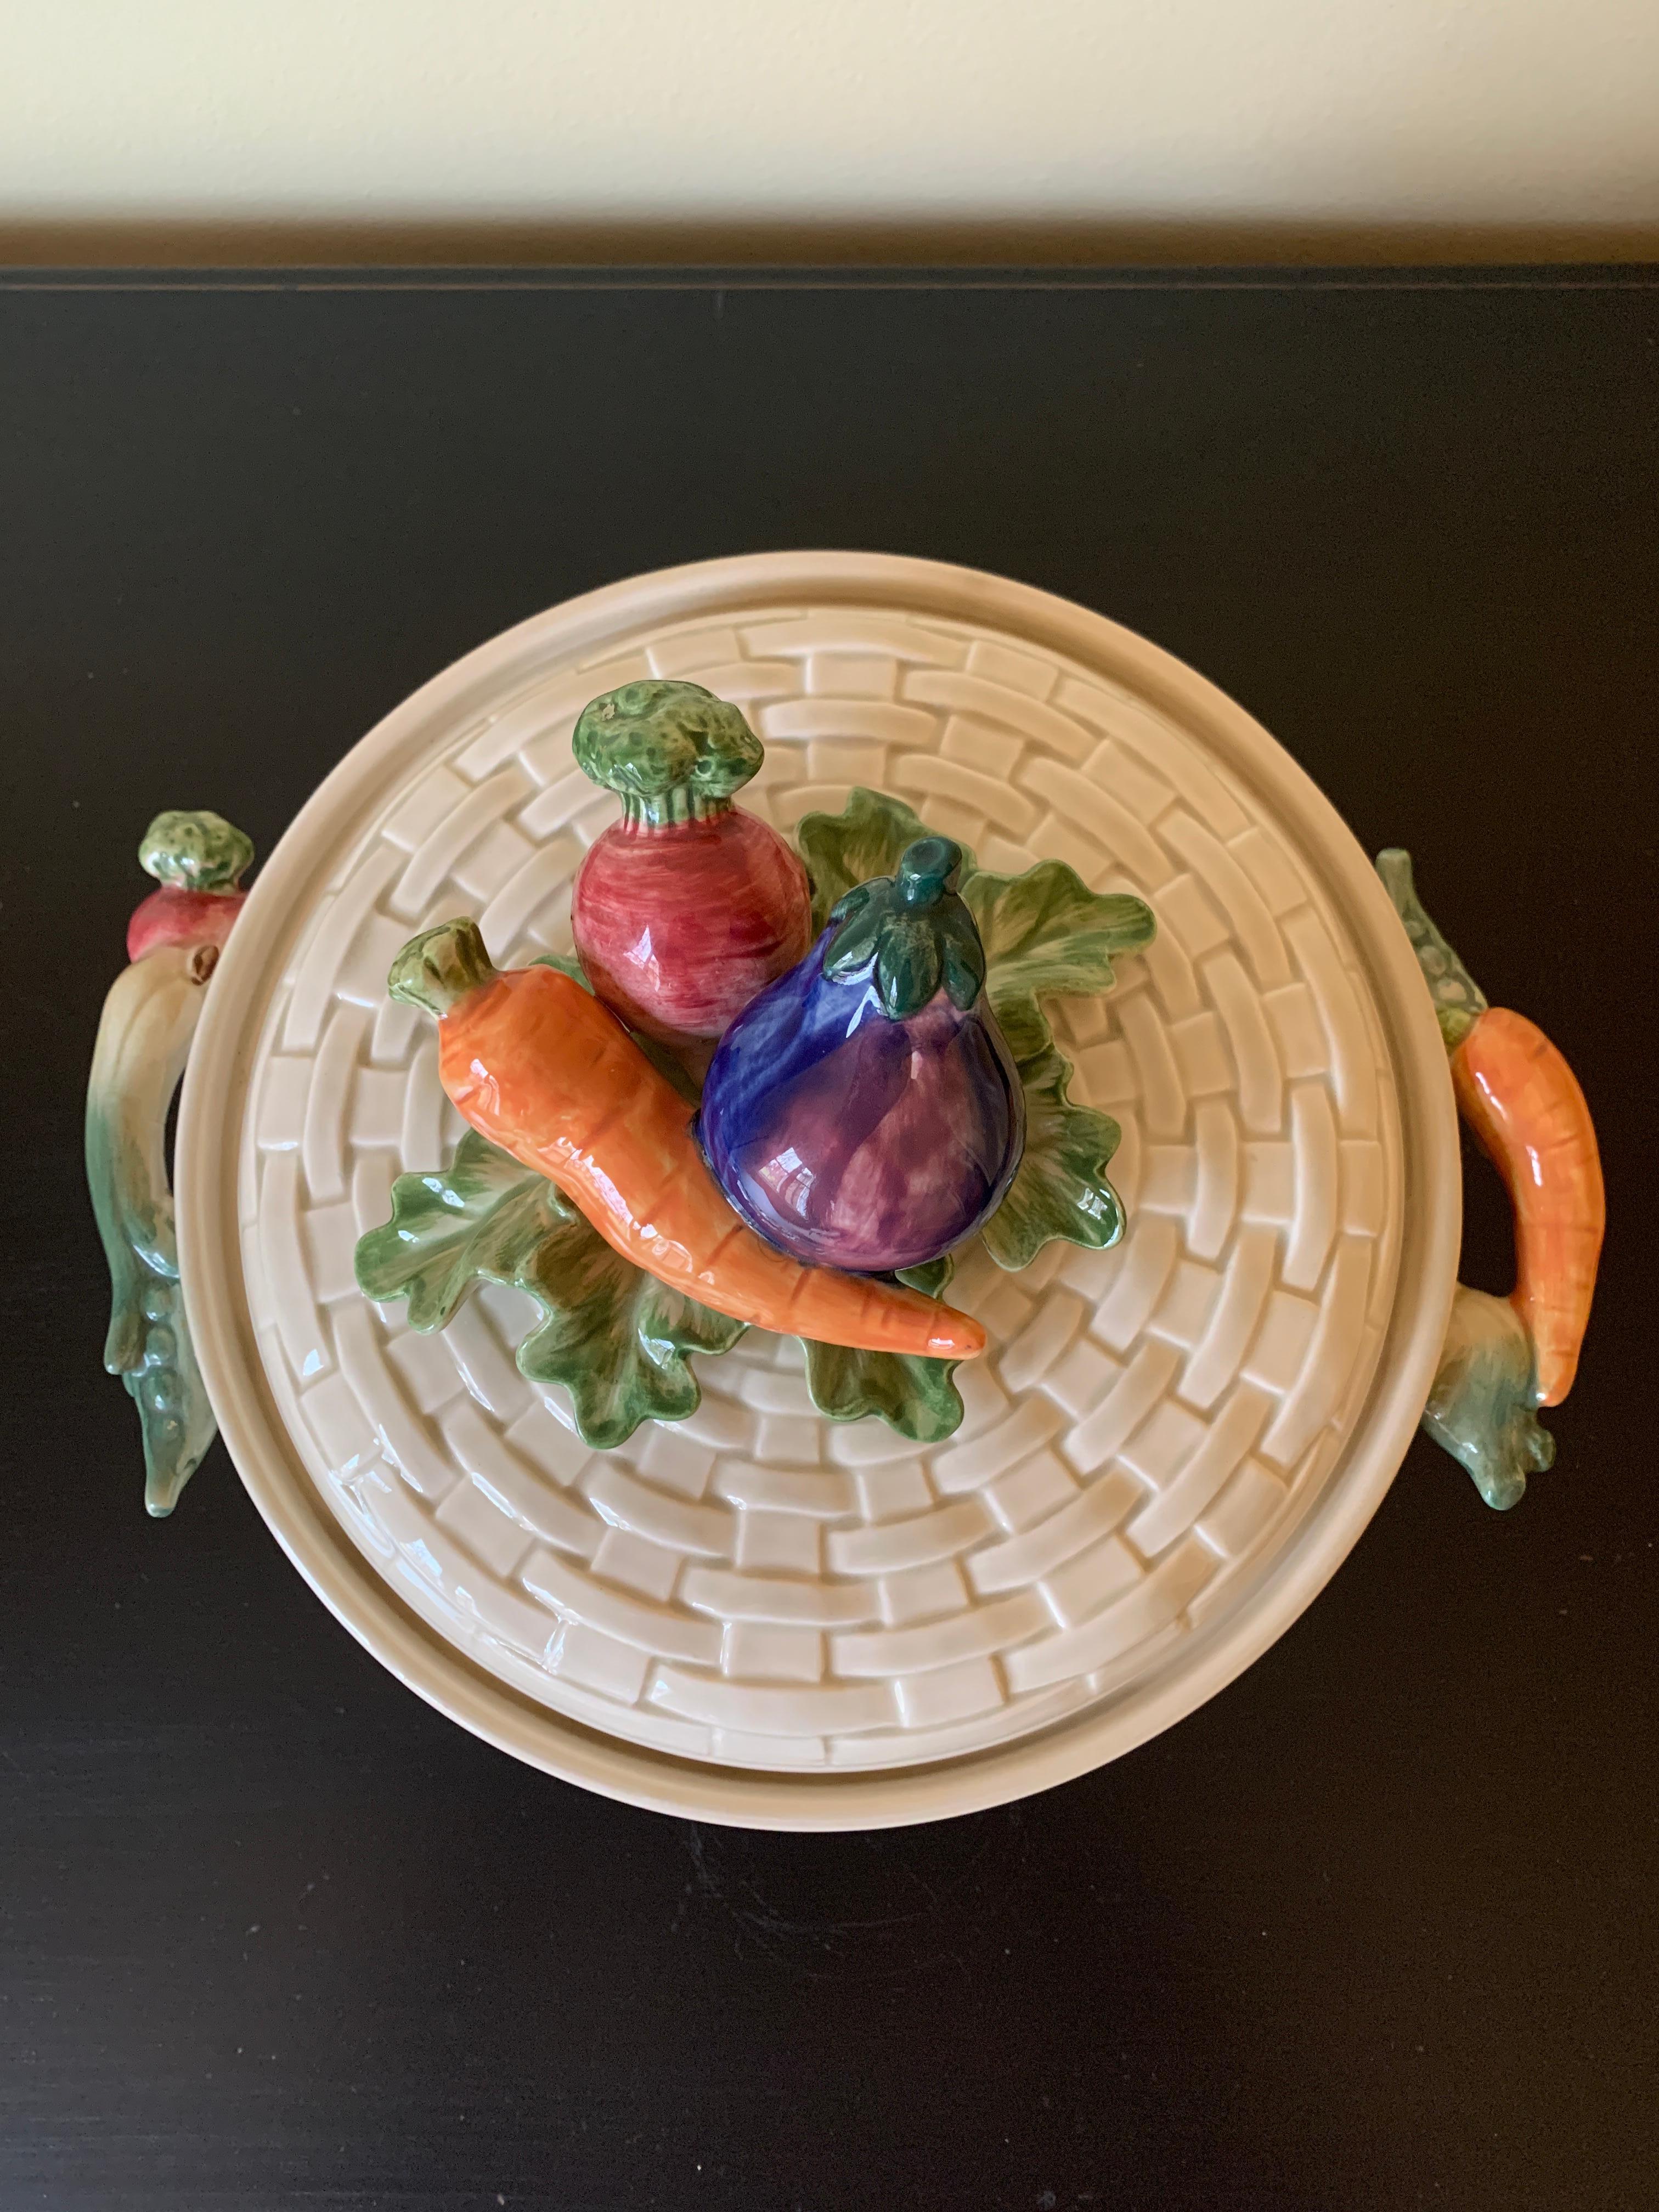 Late 20th Century Fitz & Floyd Glazed Ceramic Trompe l'Oeil Woven Basket With Vegetables Casserole For Sale